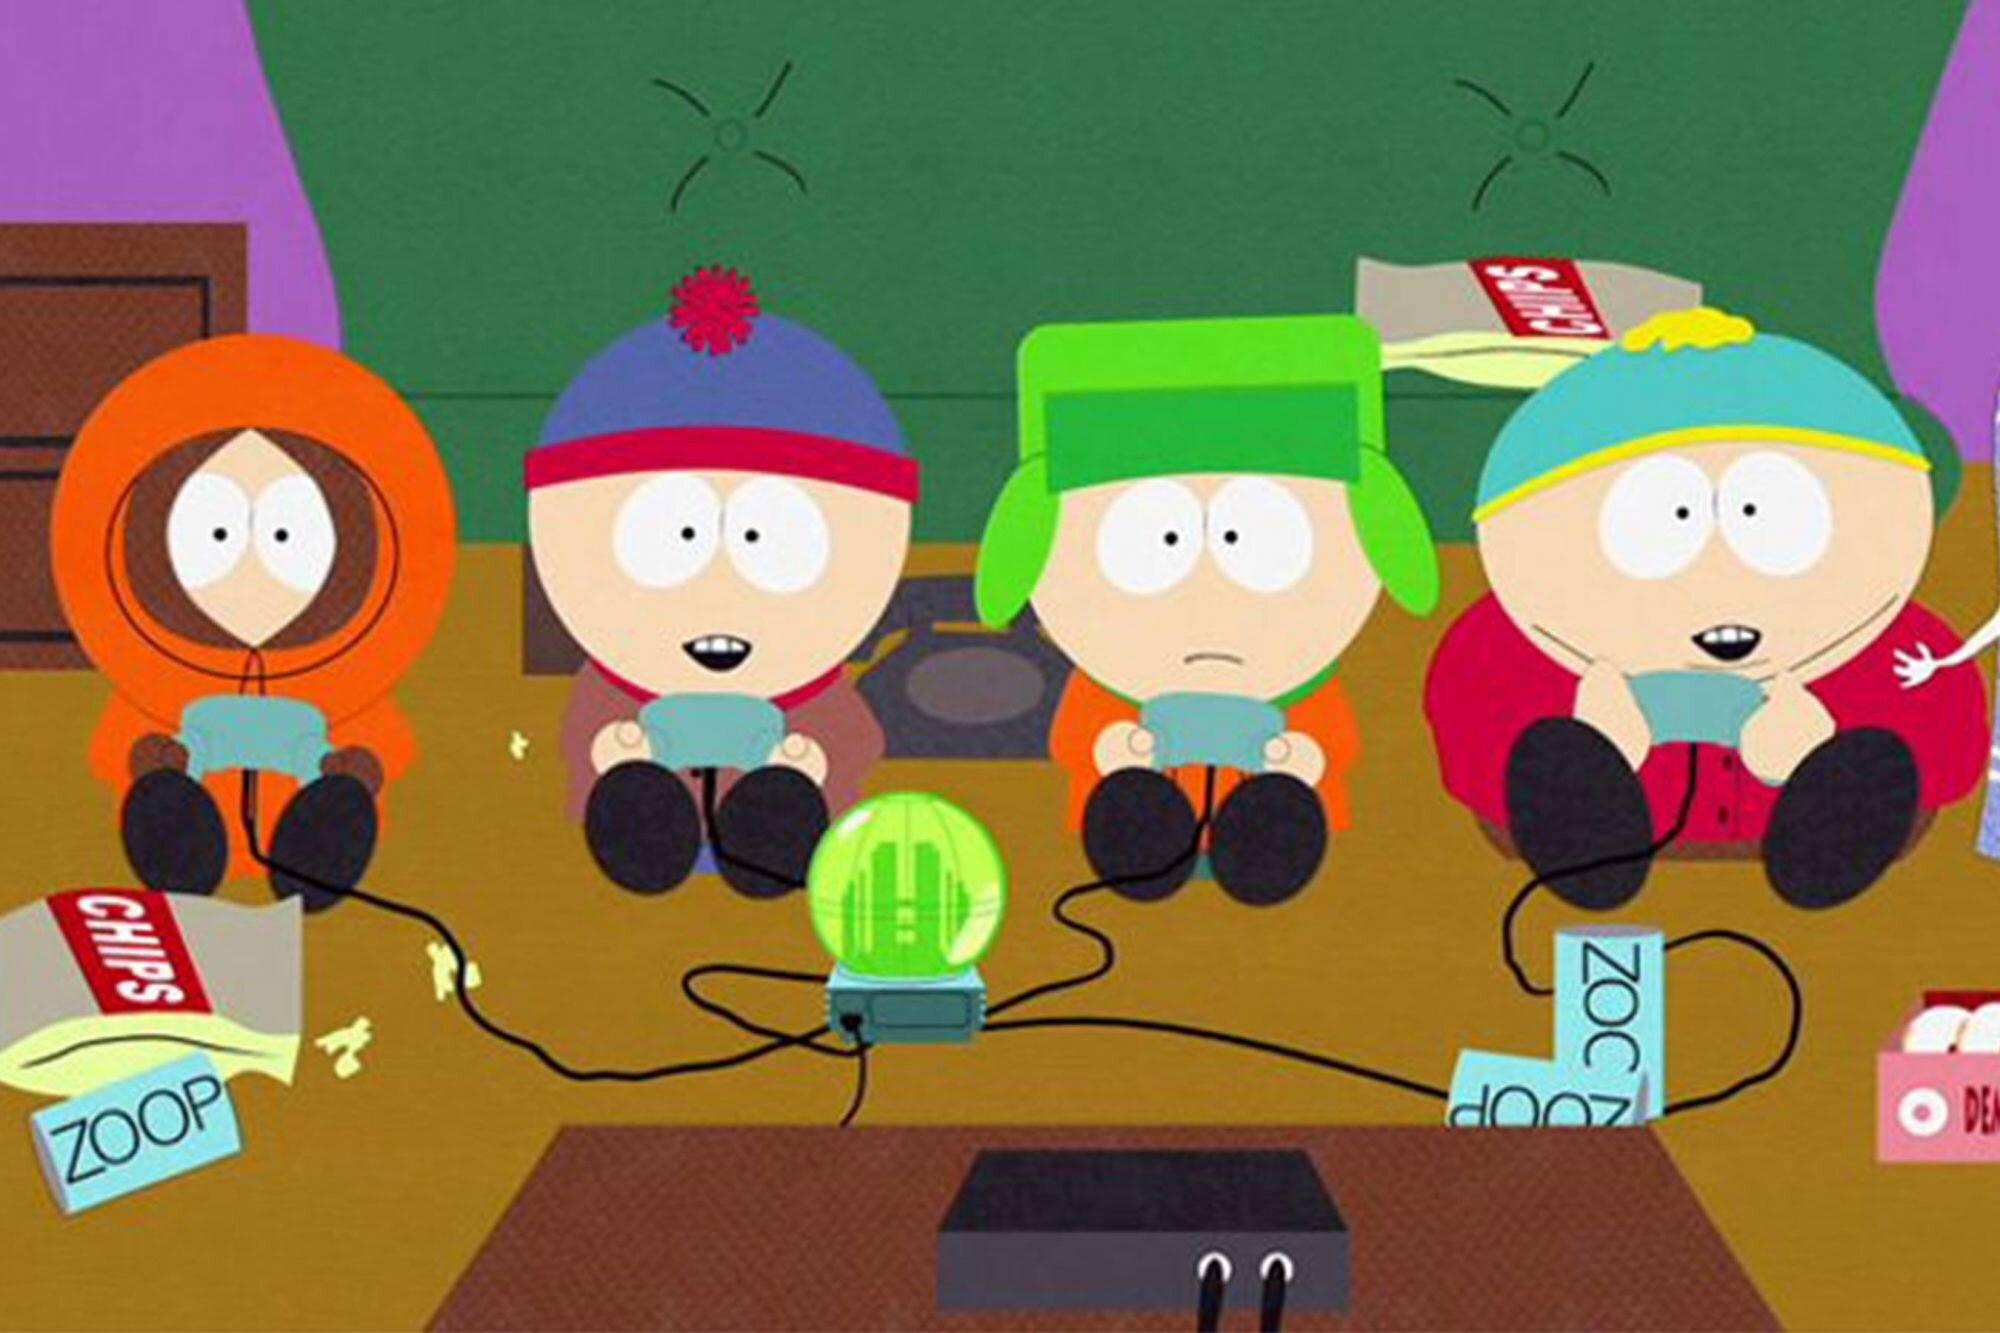 How to Watch “South Park (Not Suitable For Children)” on Roku, Fire TV, Apple TV, & More